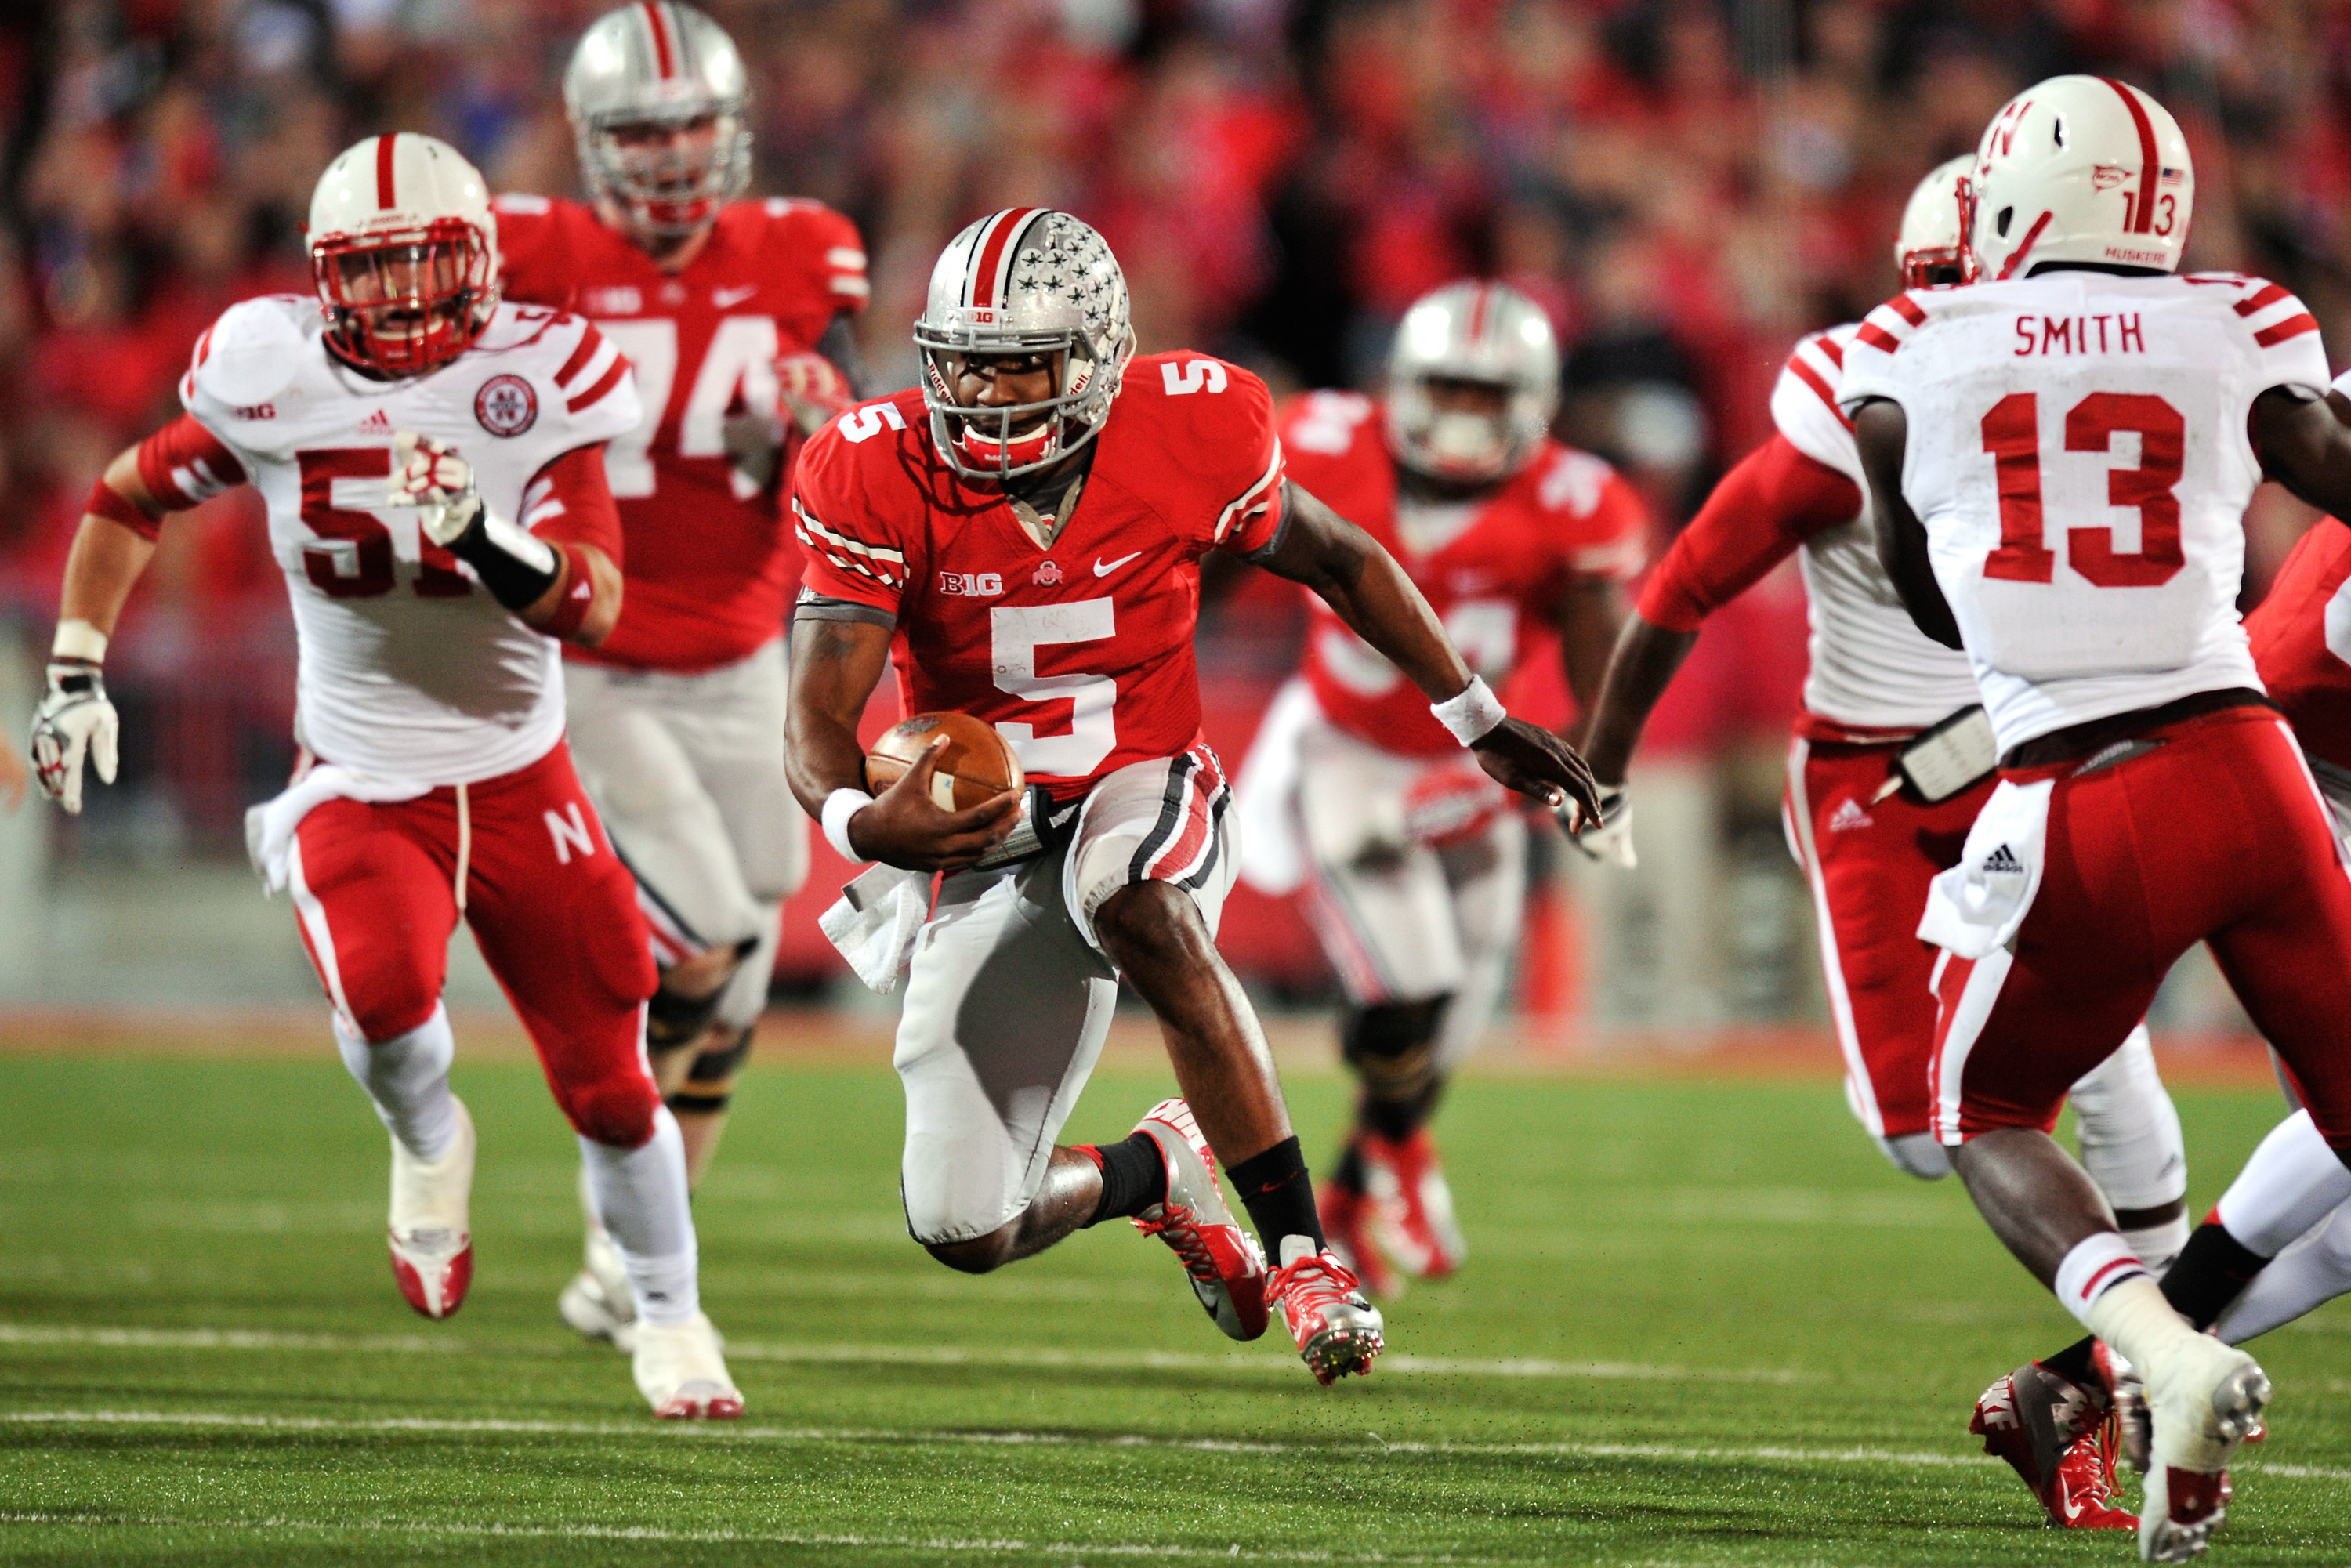 Ohio State Buckeyes Football Backgrounds Download | Wallpapers ...